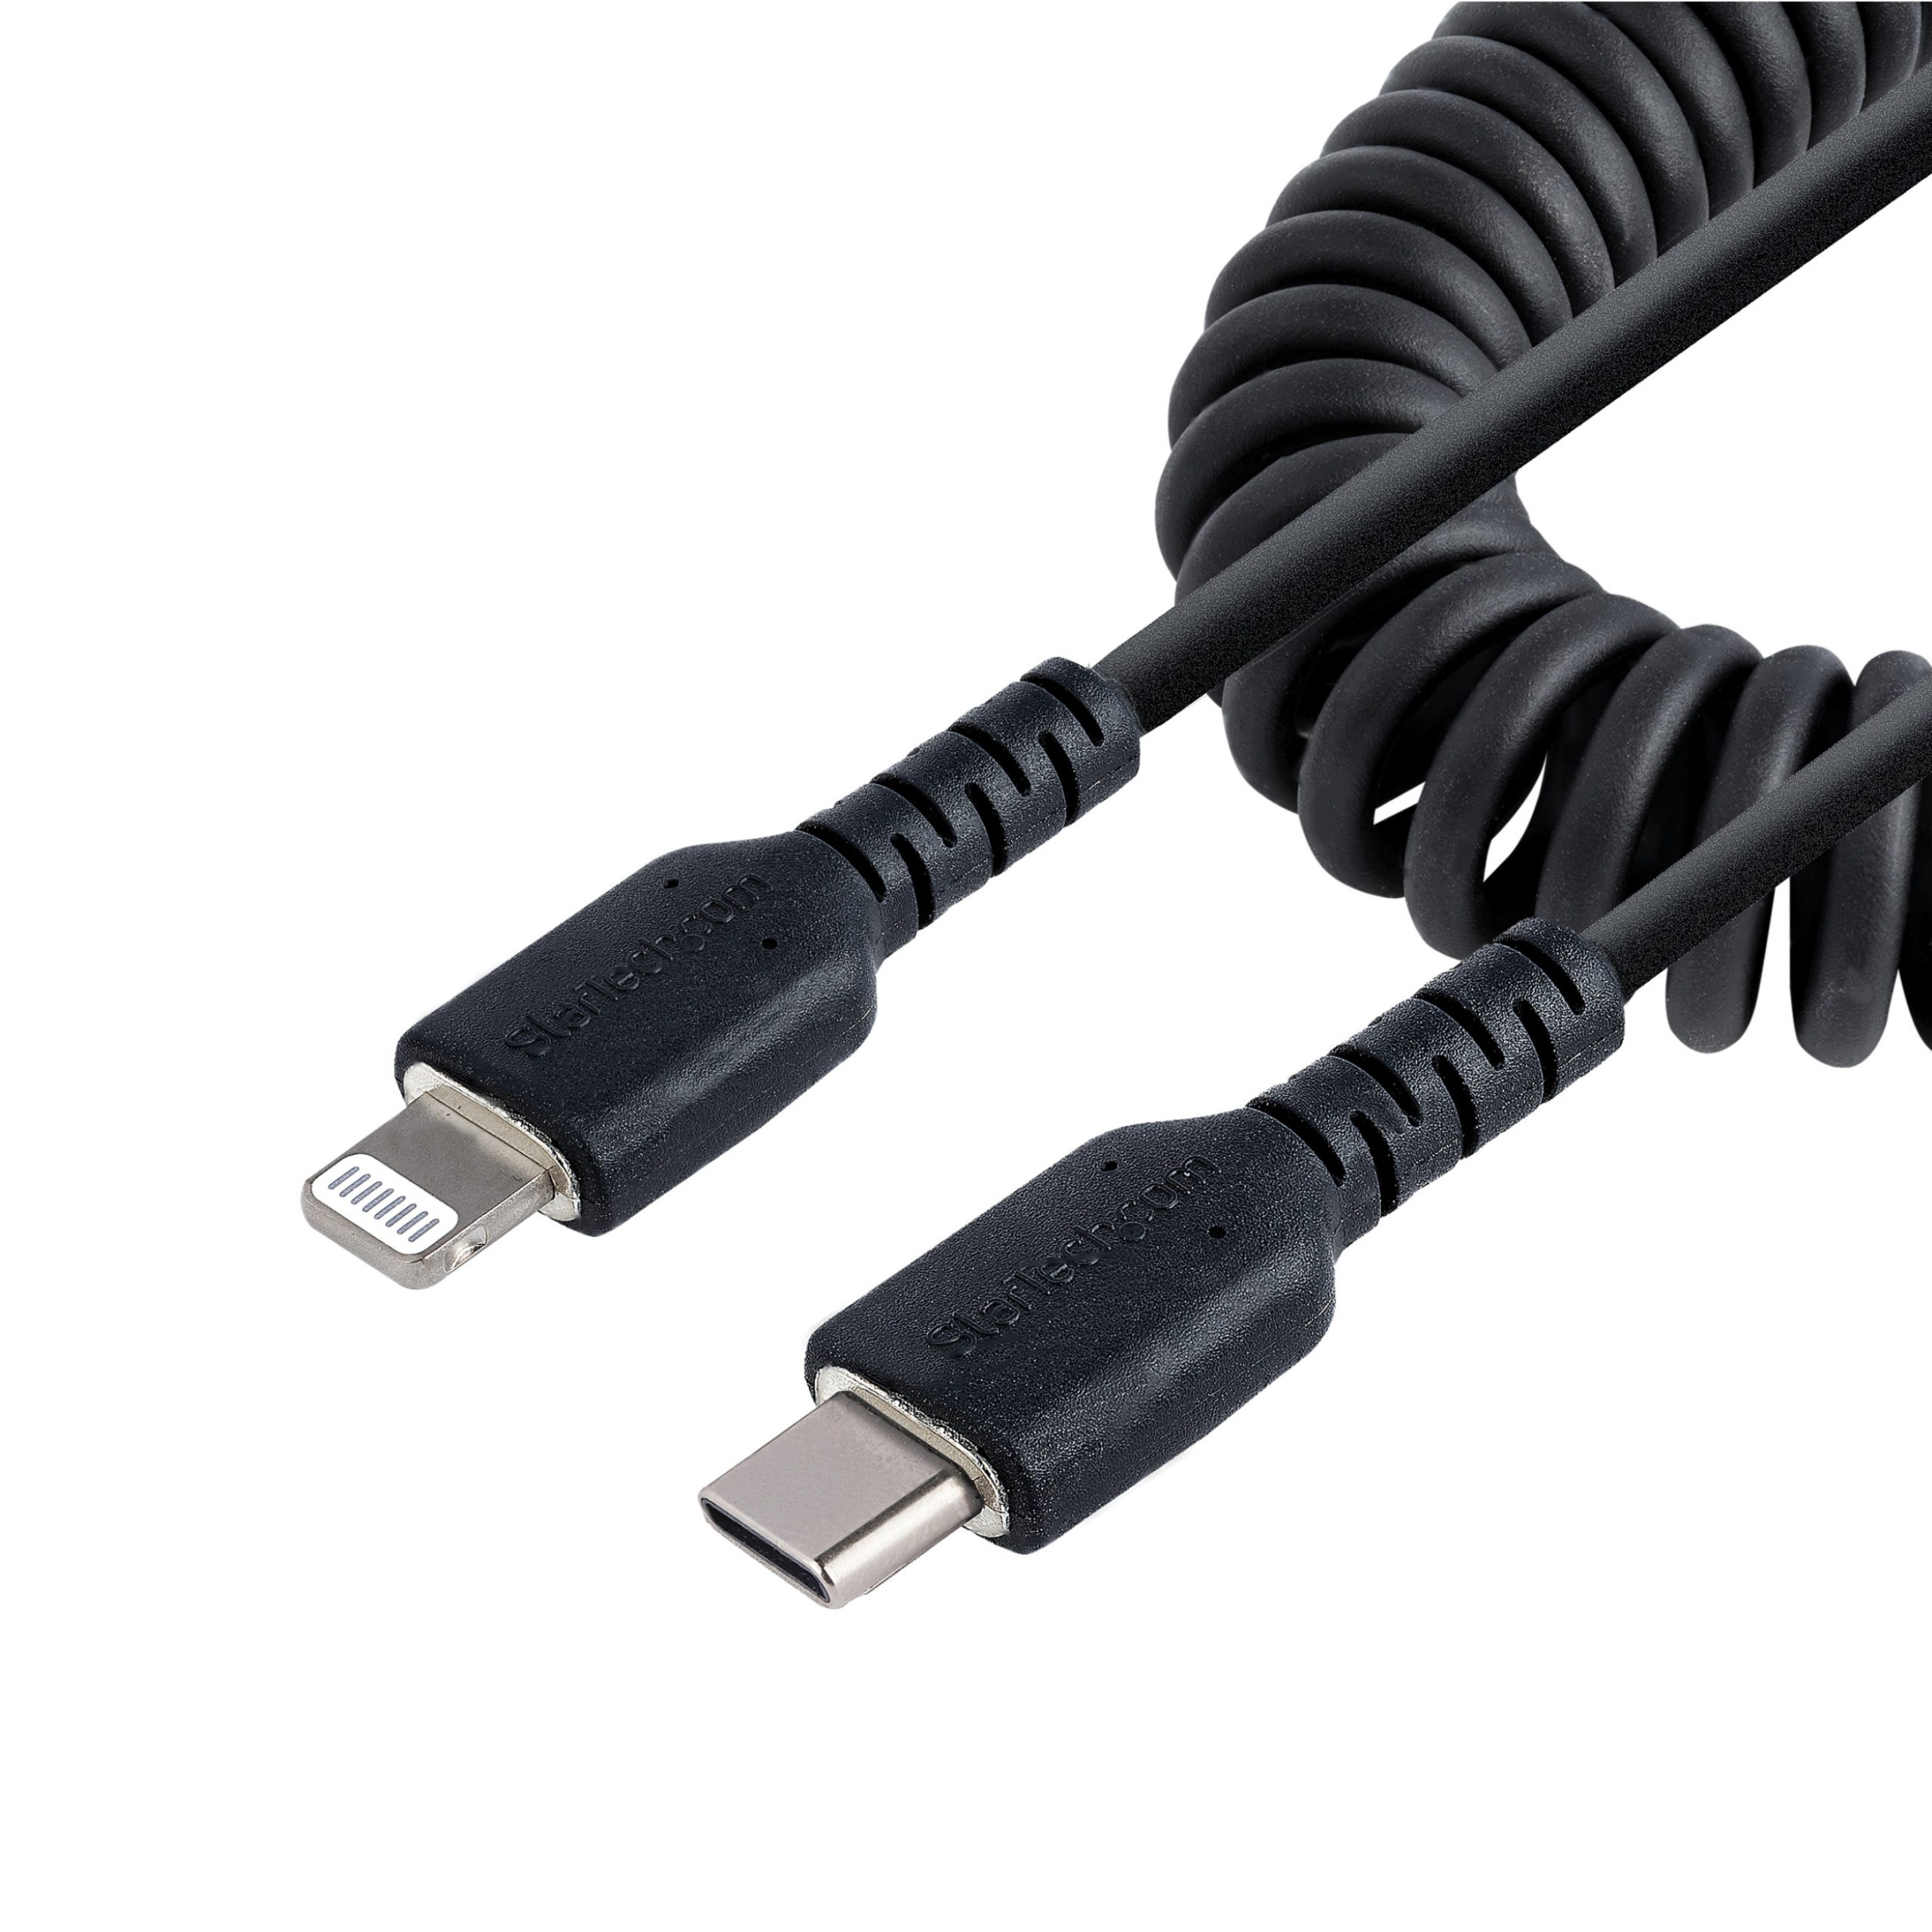 Startech .com USB C to Lightning Cable 50cm / 20in, MFi Certified, Coiled  iPhone Charger Cable, Black, TPE Jacket Aramid Fiber20in (50c...  RUSB2CLT50CMBC - Corporate Armor